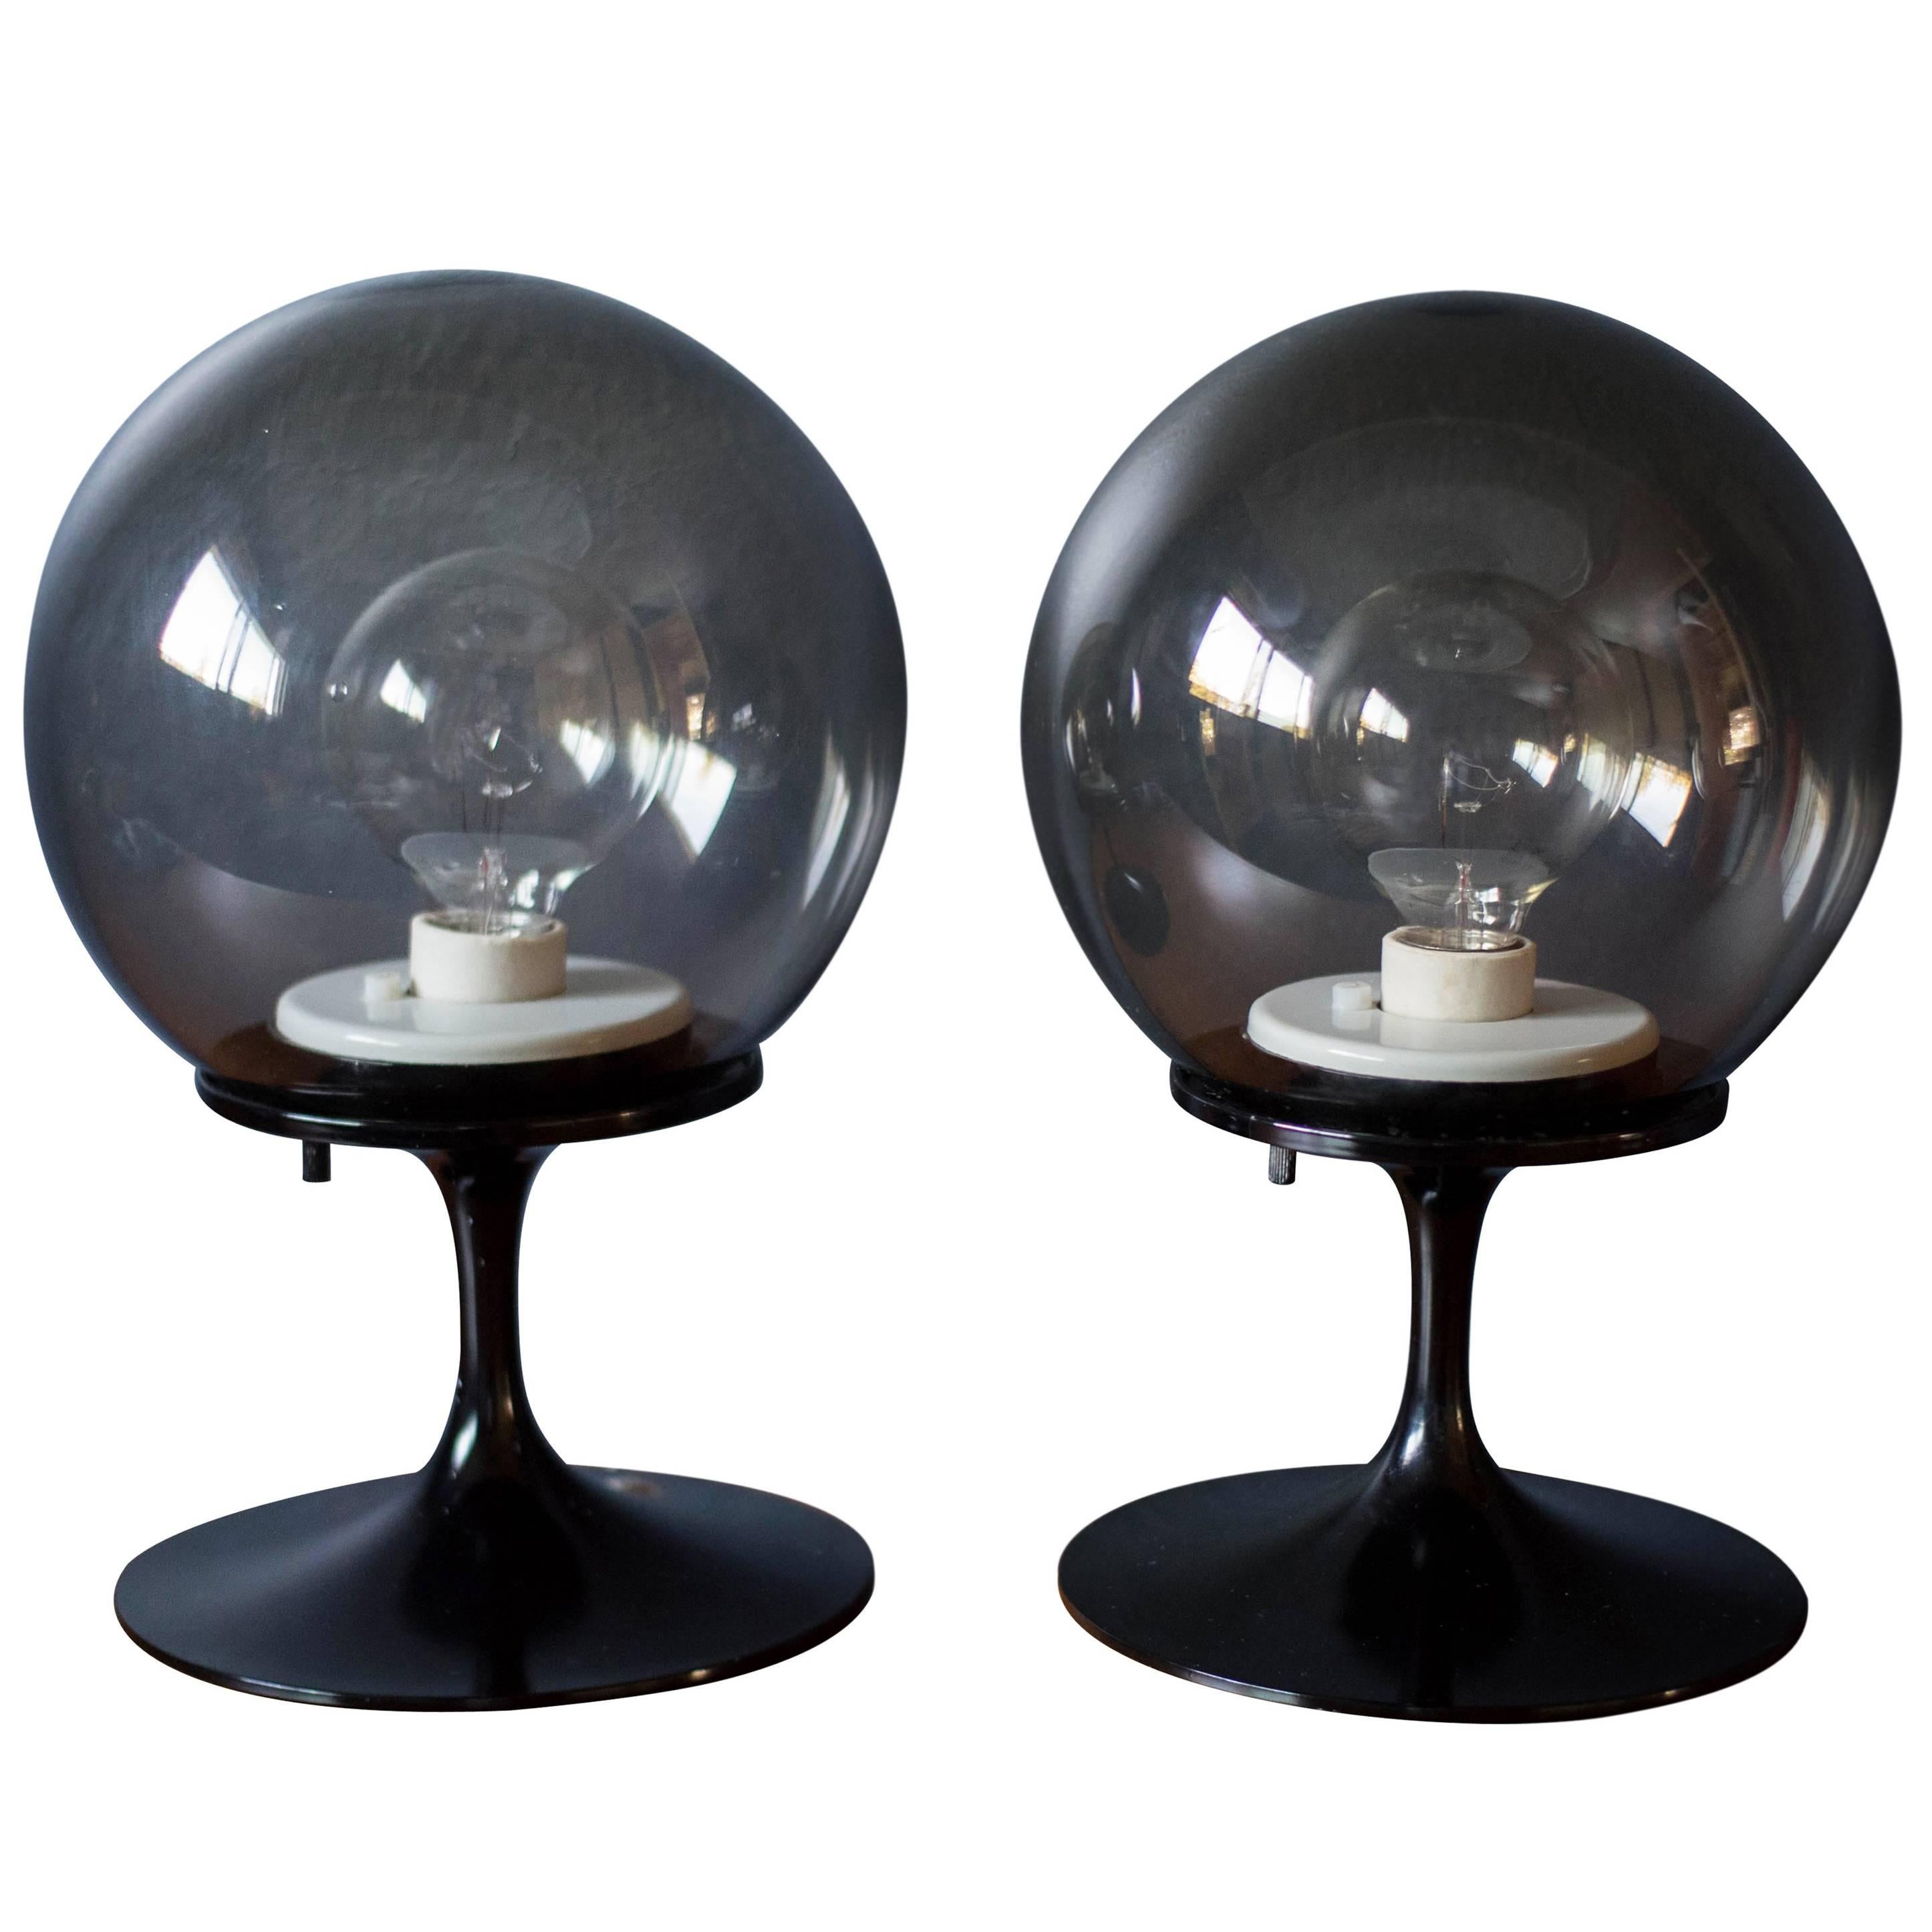 Pair of Bill Curry Stemlite Lamps for Design Line